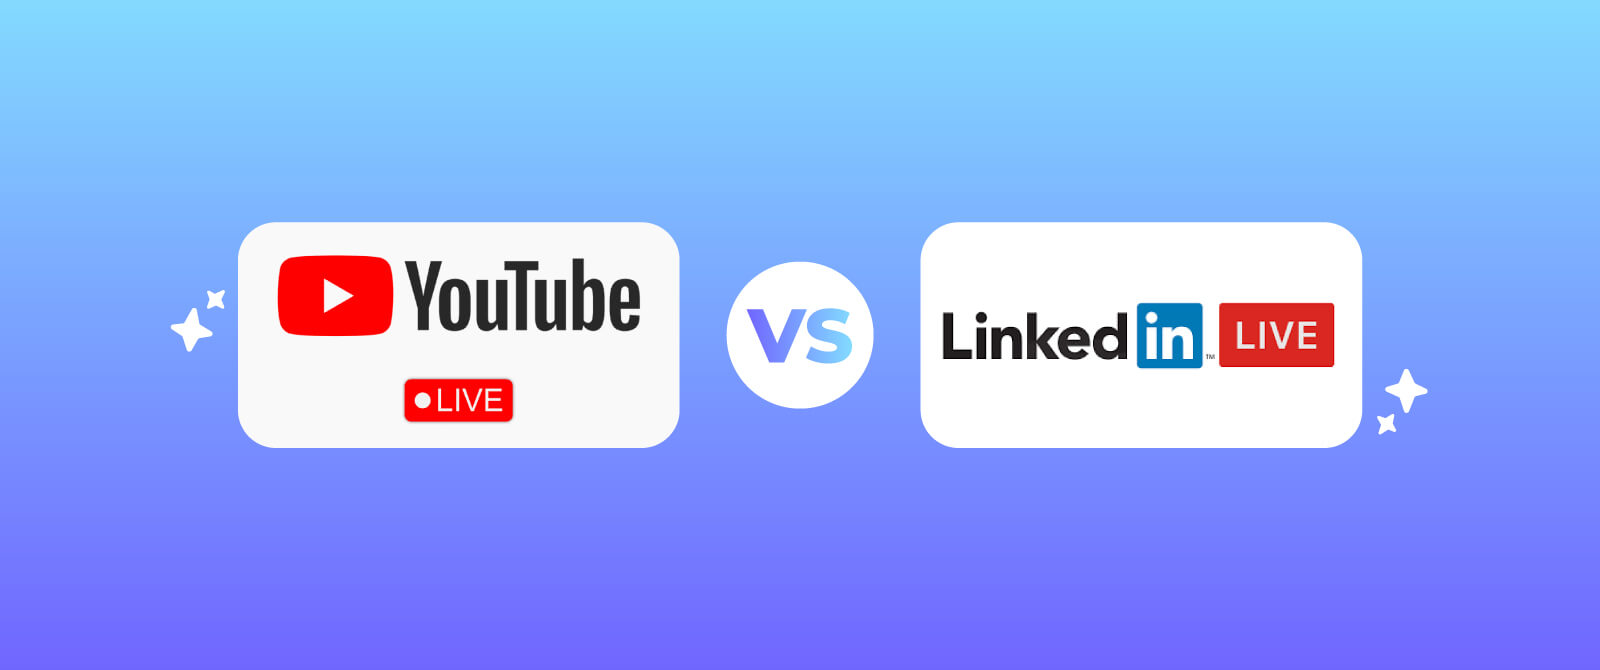 YouTube Live Vs LinkedIn Live: Which is Best for B2B Events?